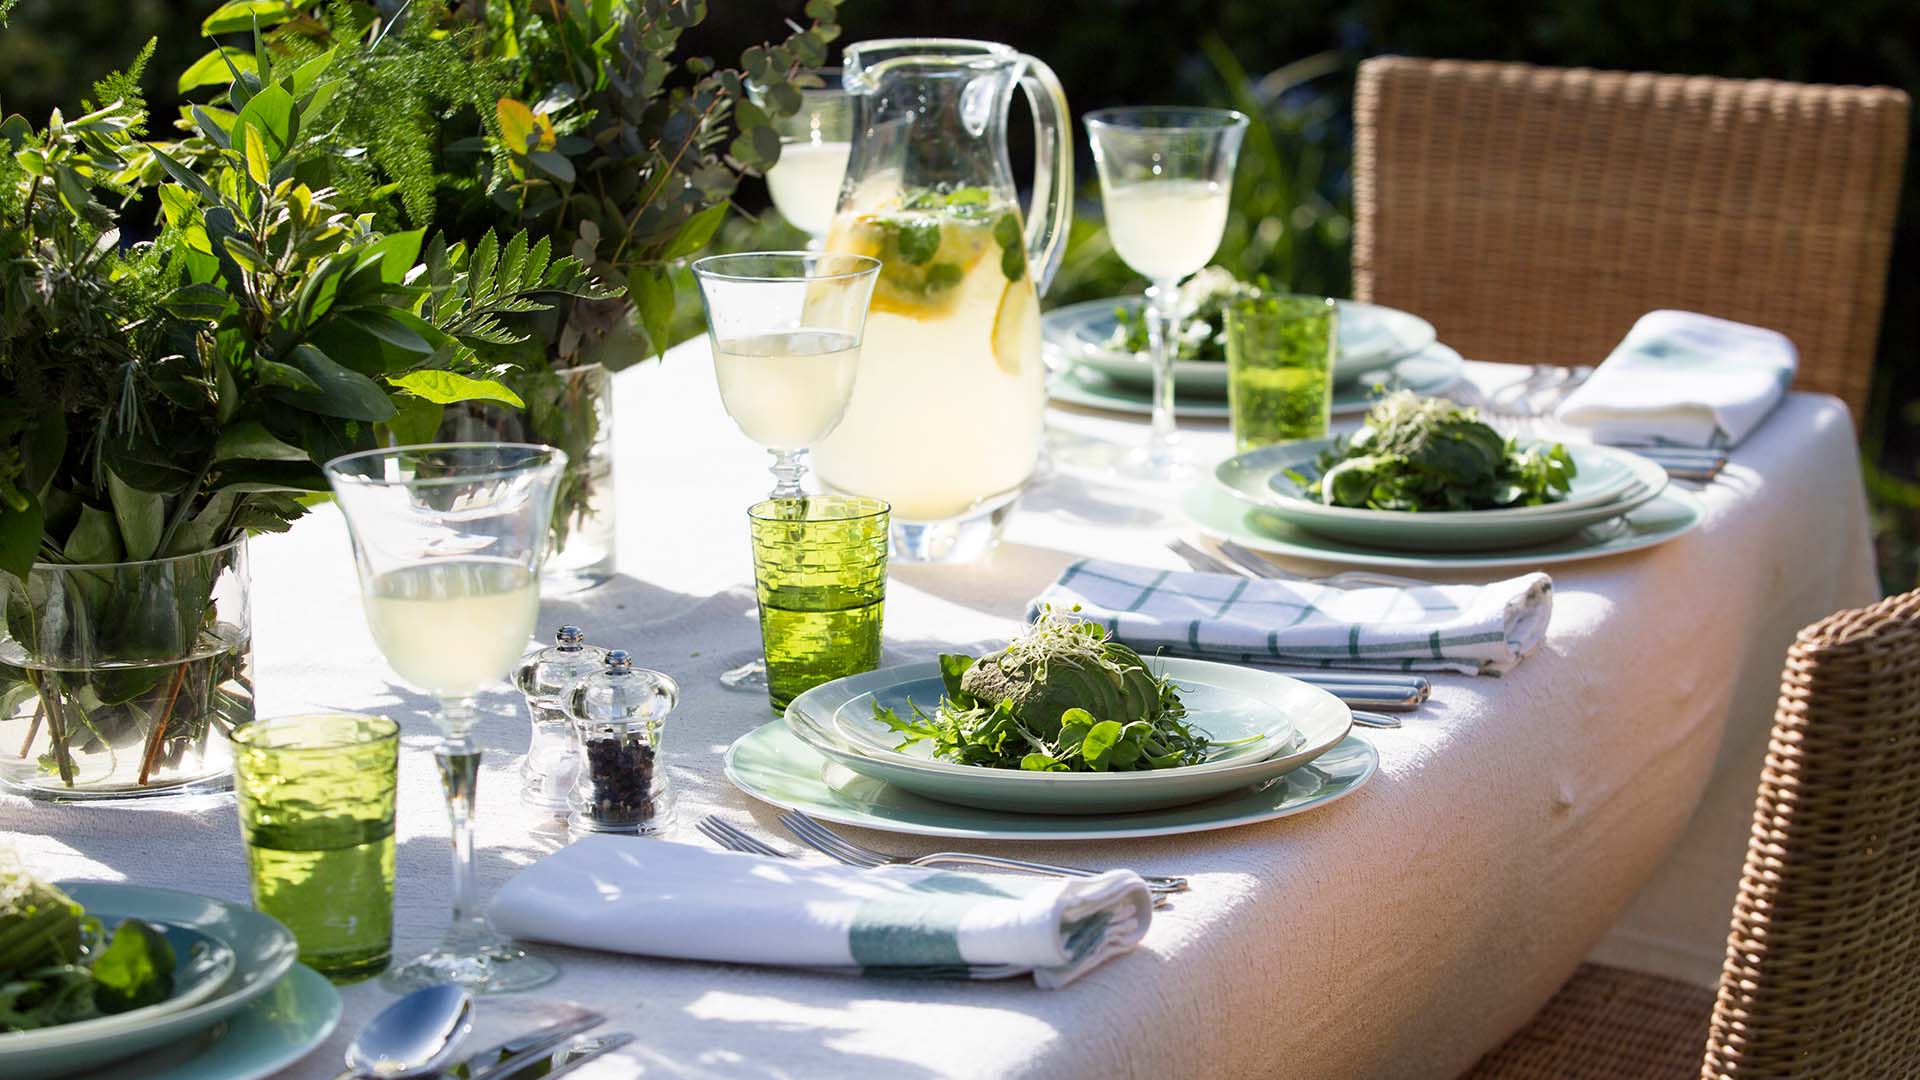 Outdoor lunch created by private lunch caterer